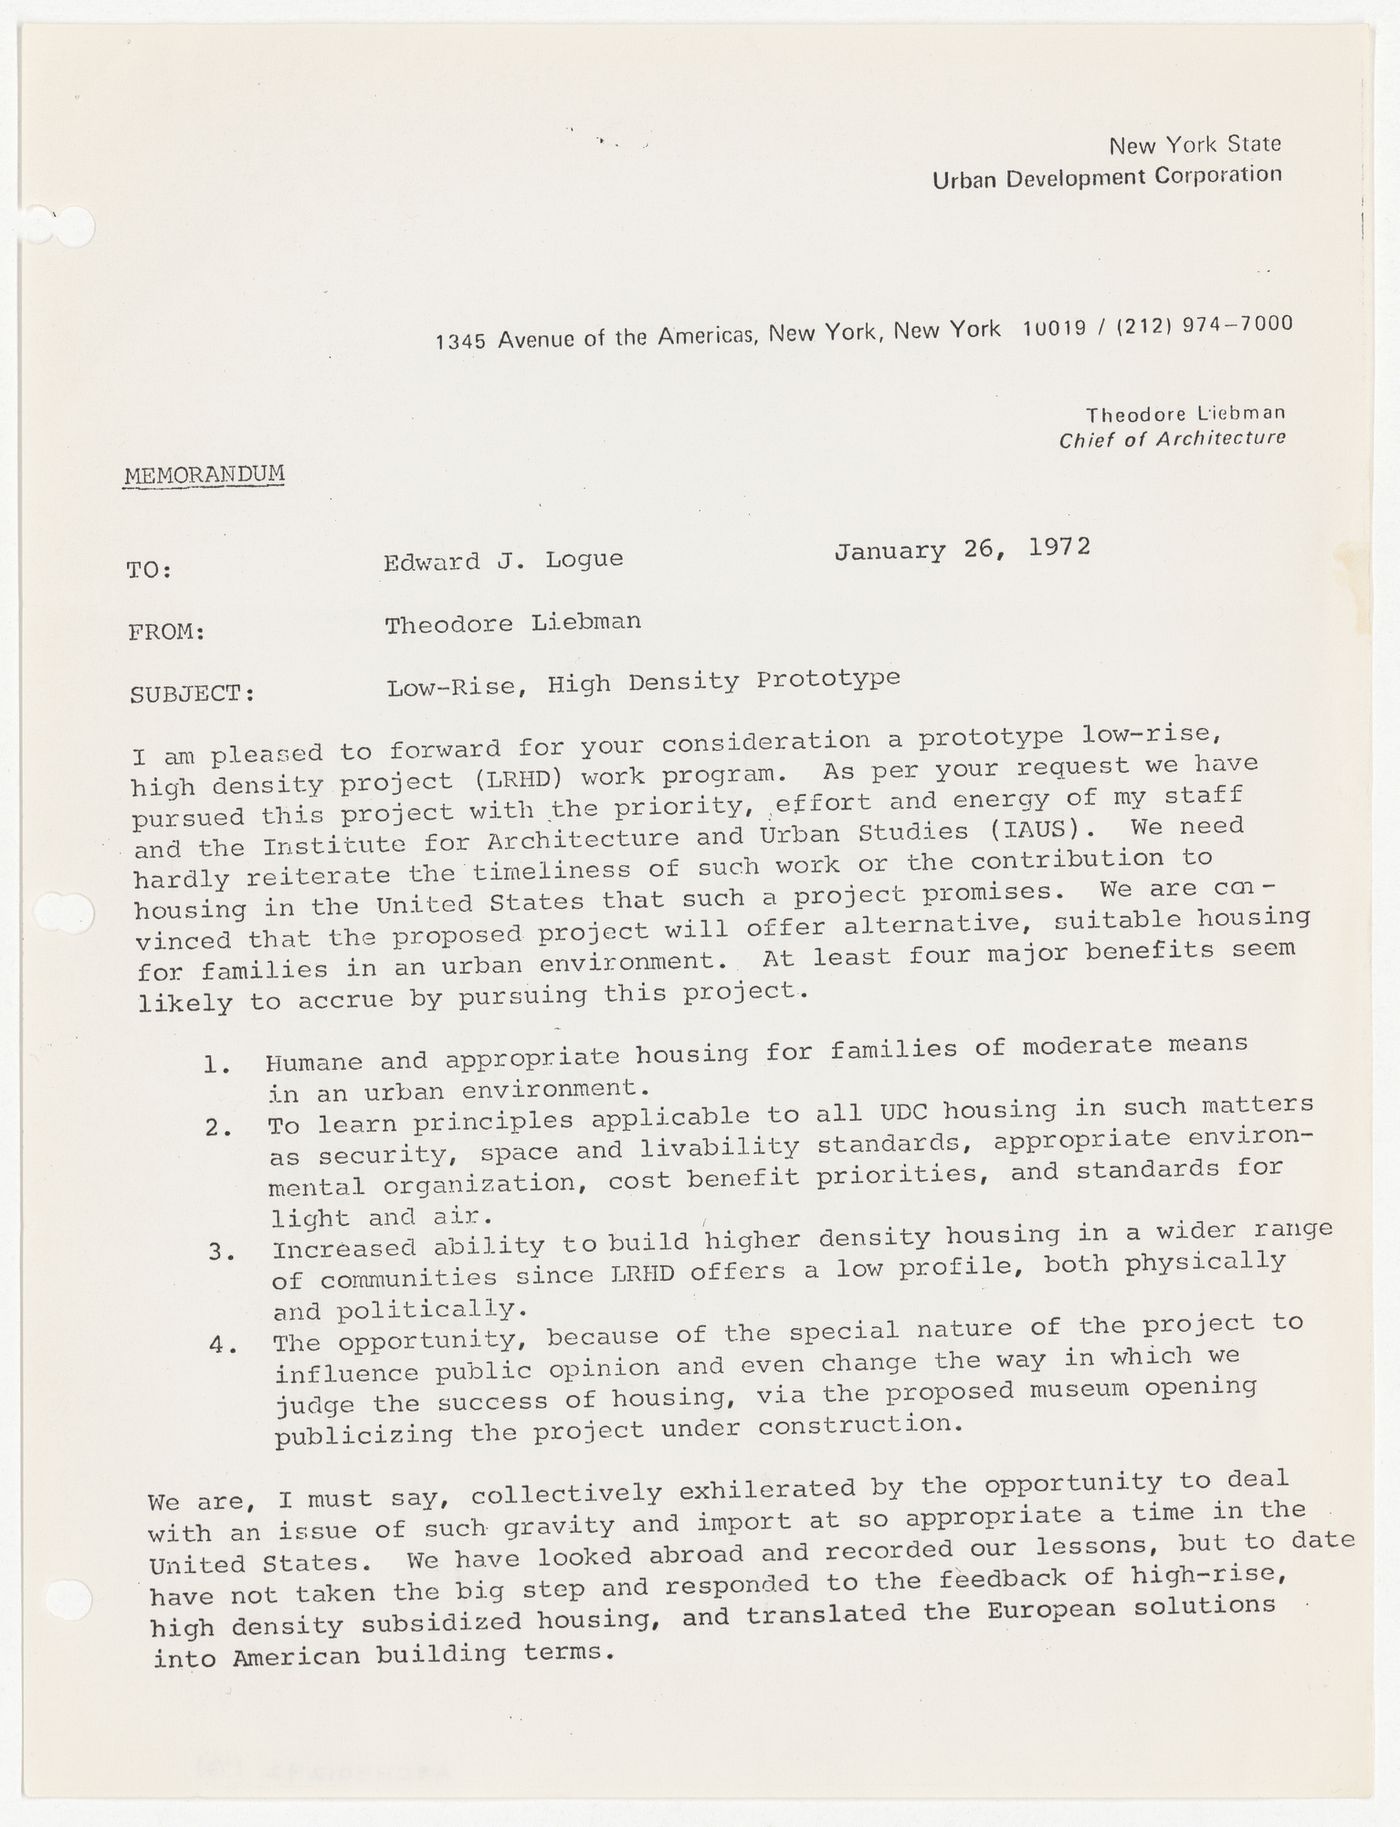 Memorandum from Theodore Liebman to Edward J. Logue about Low-Rise High-Density (LRHD) prototype